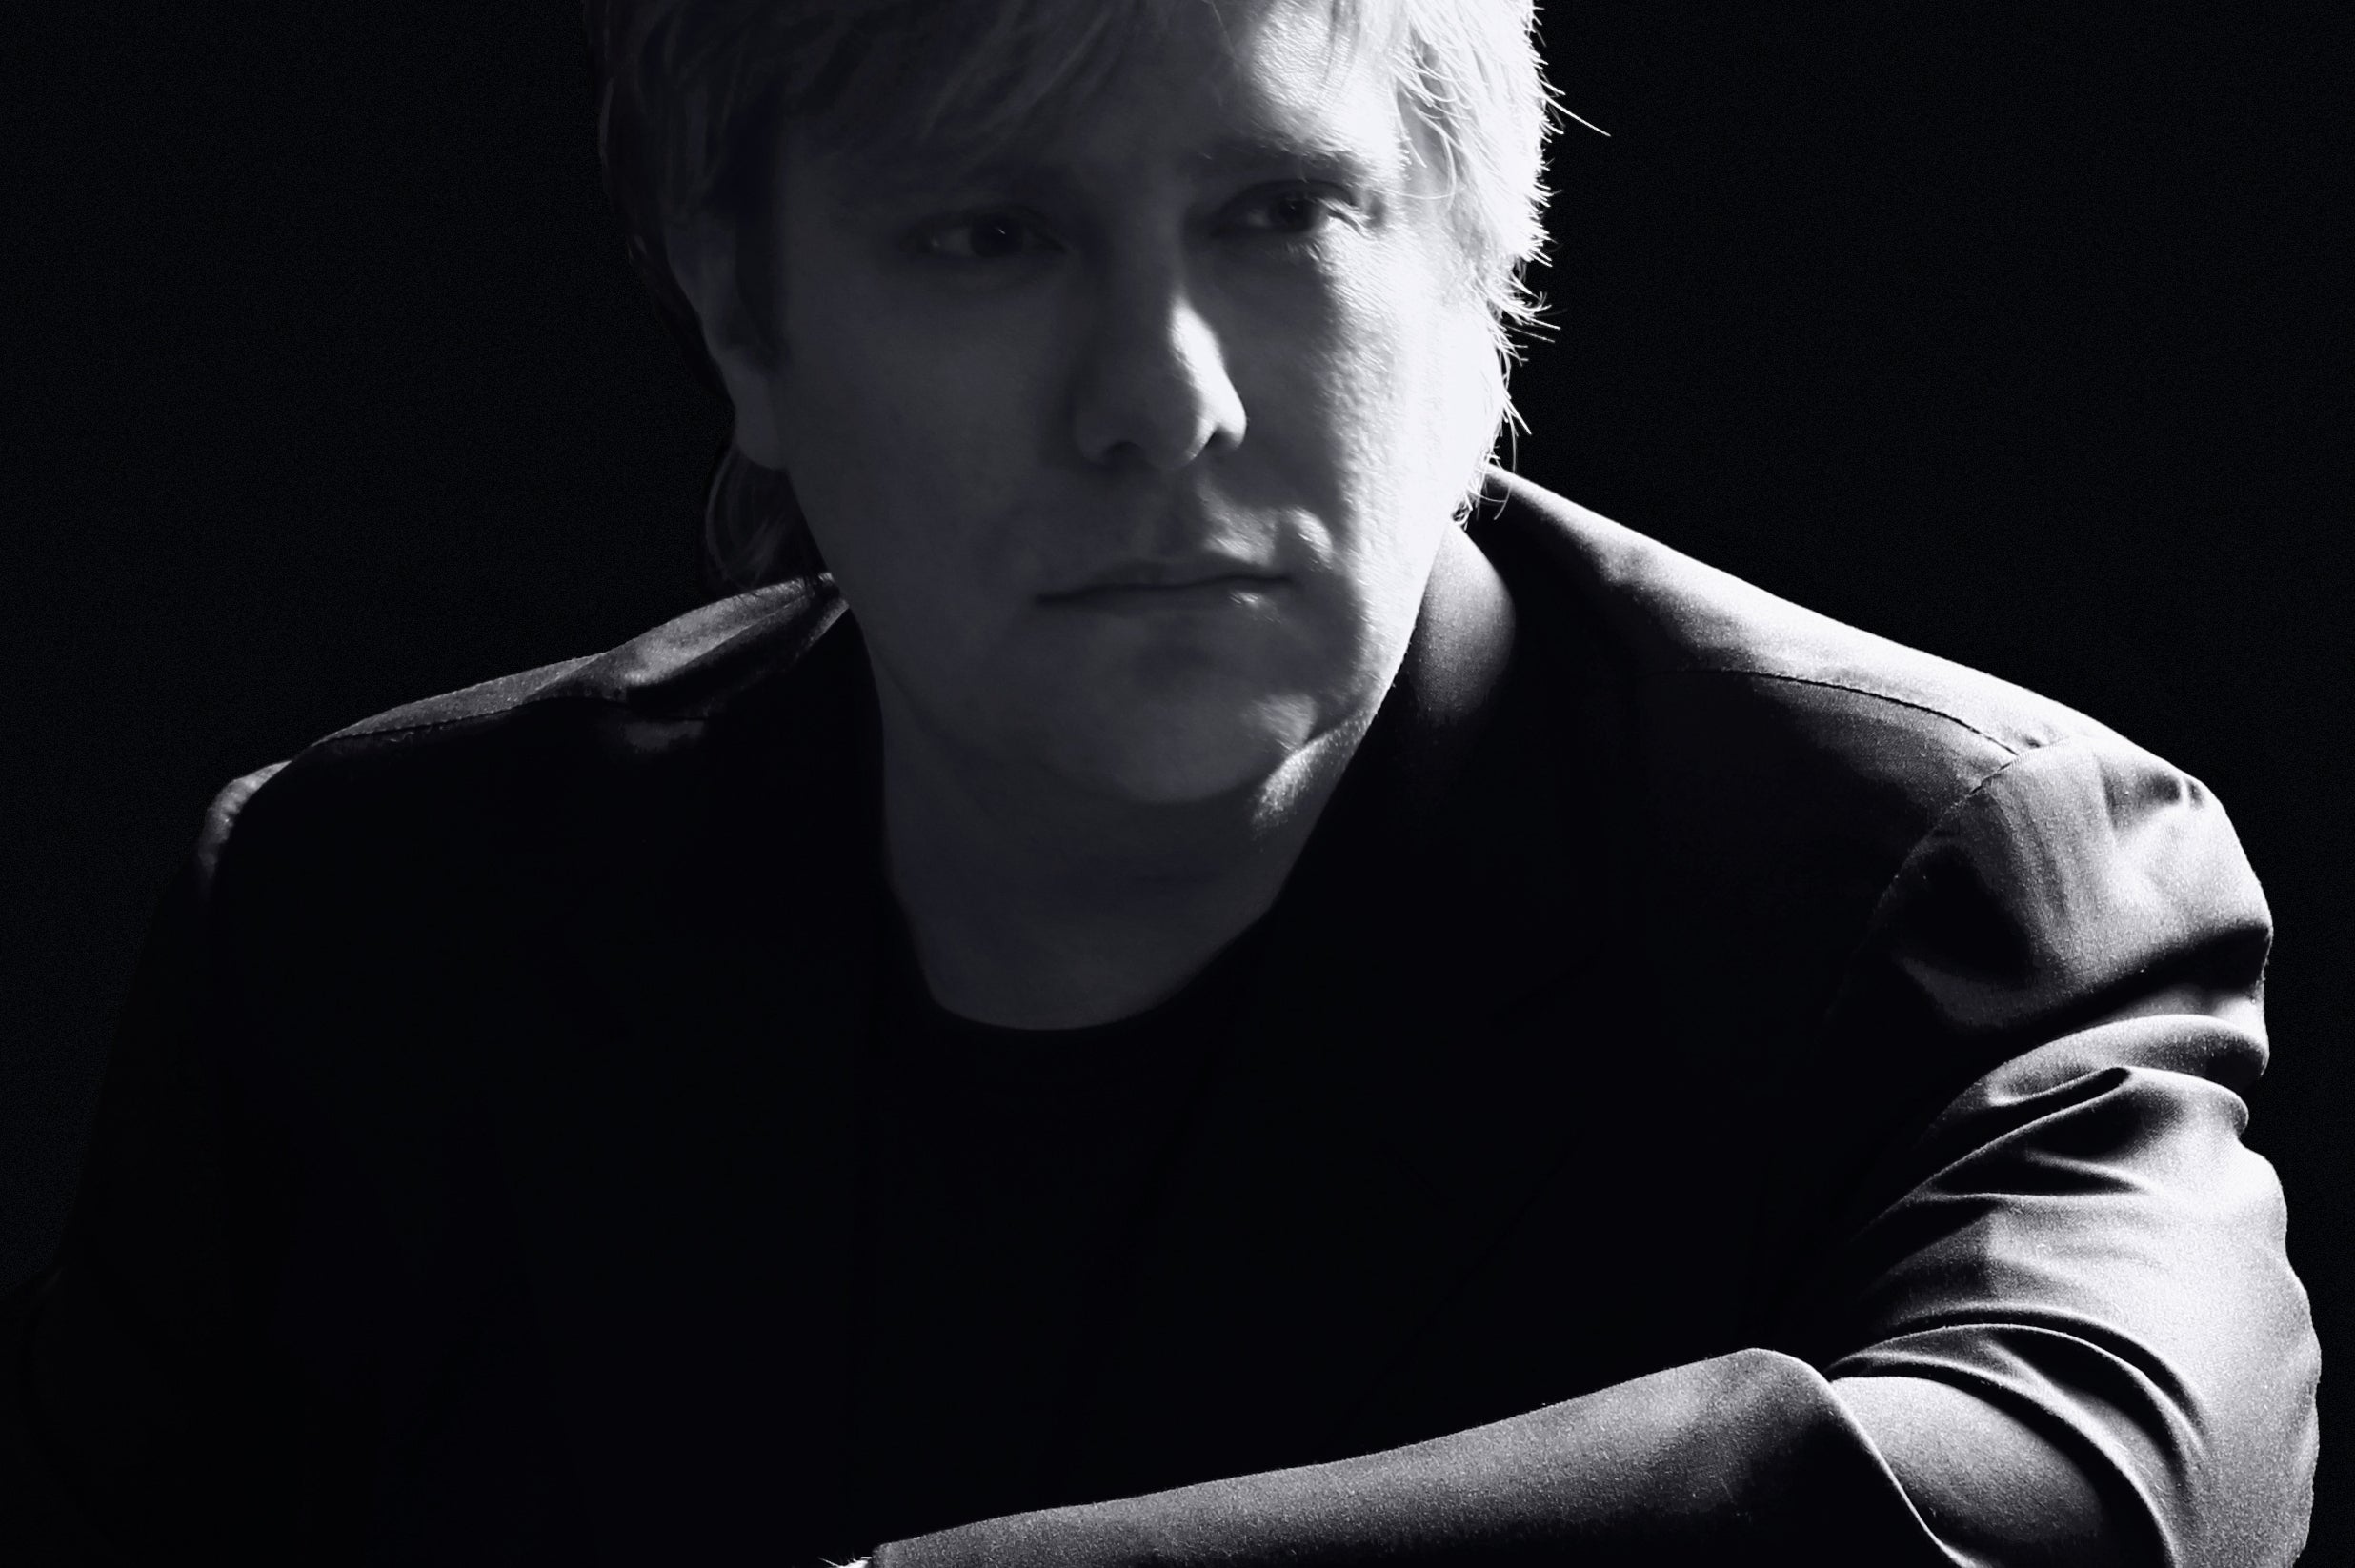 Image for Jeremy Soule: "Pac-Man will eat Mark Zuckerberg's lunch"